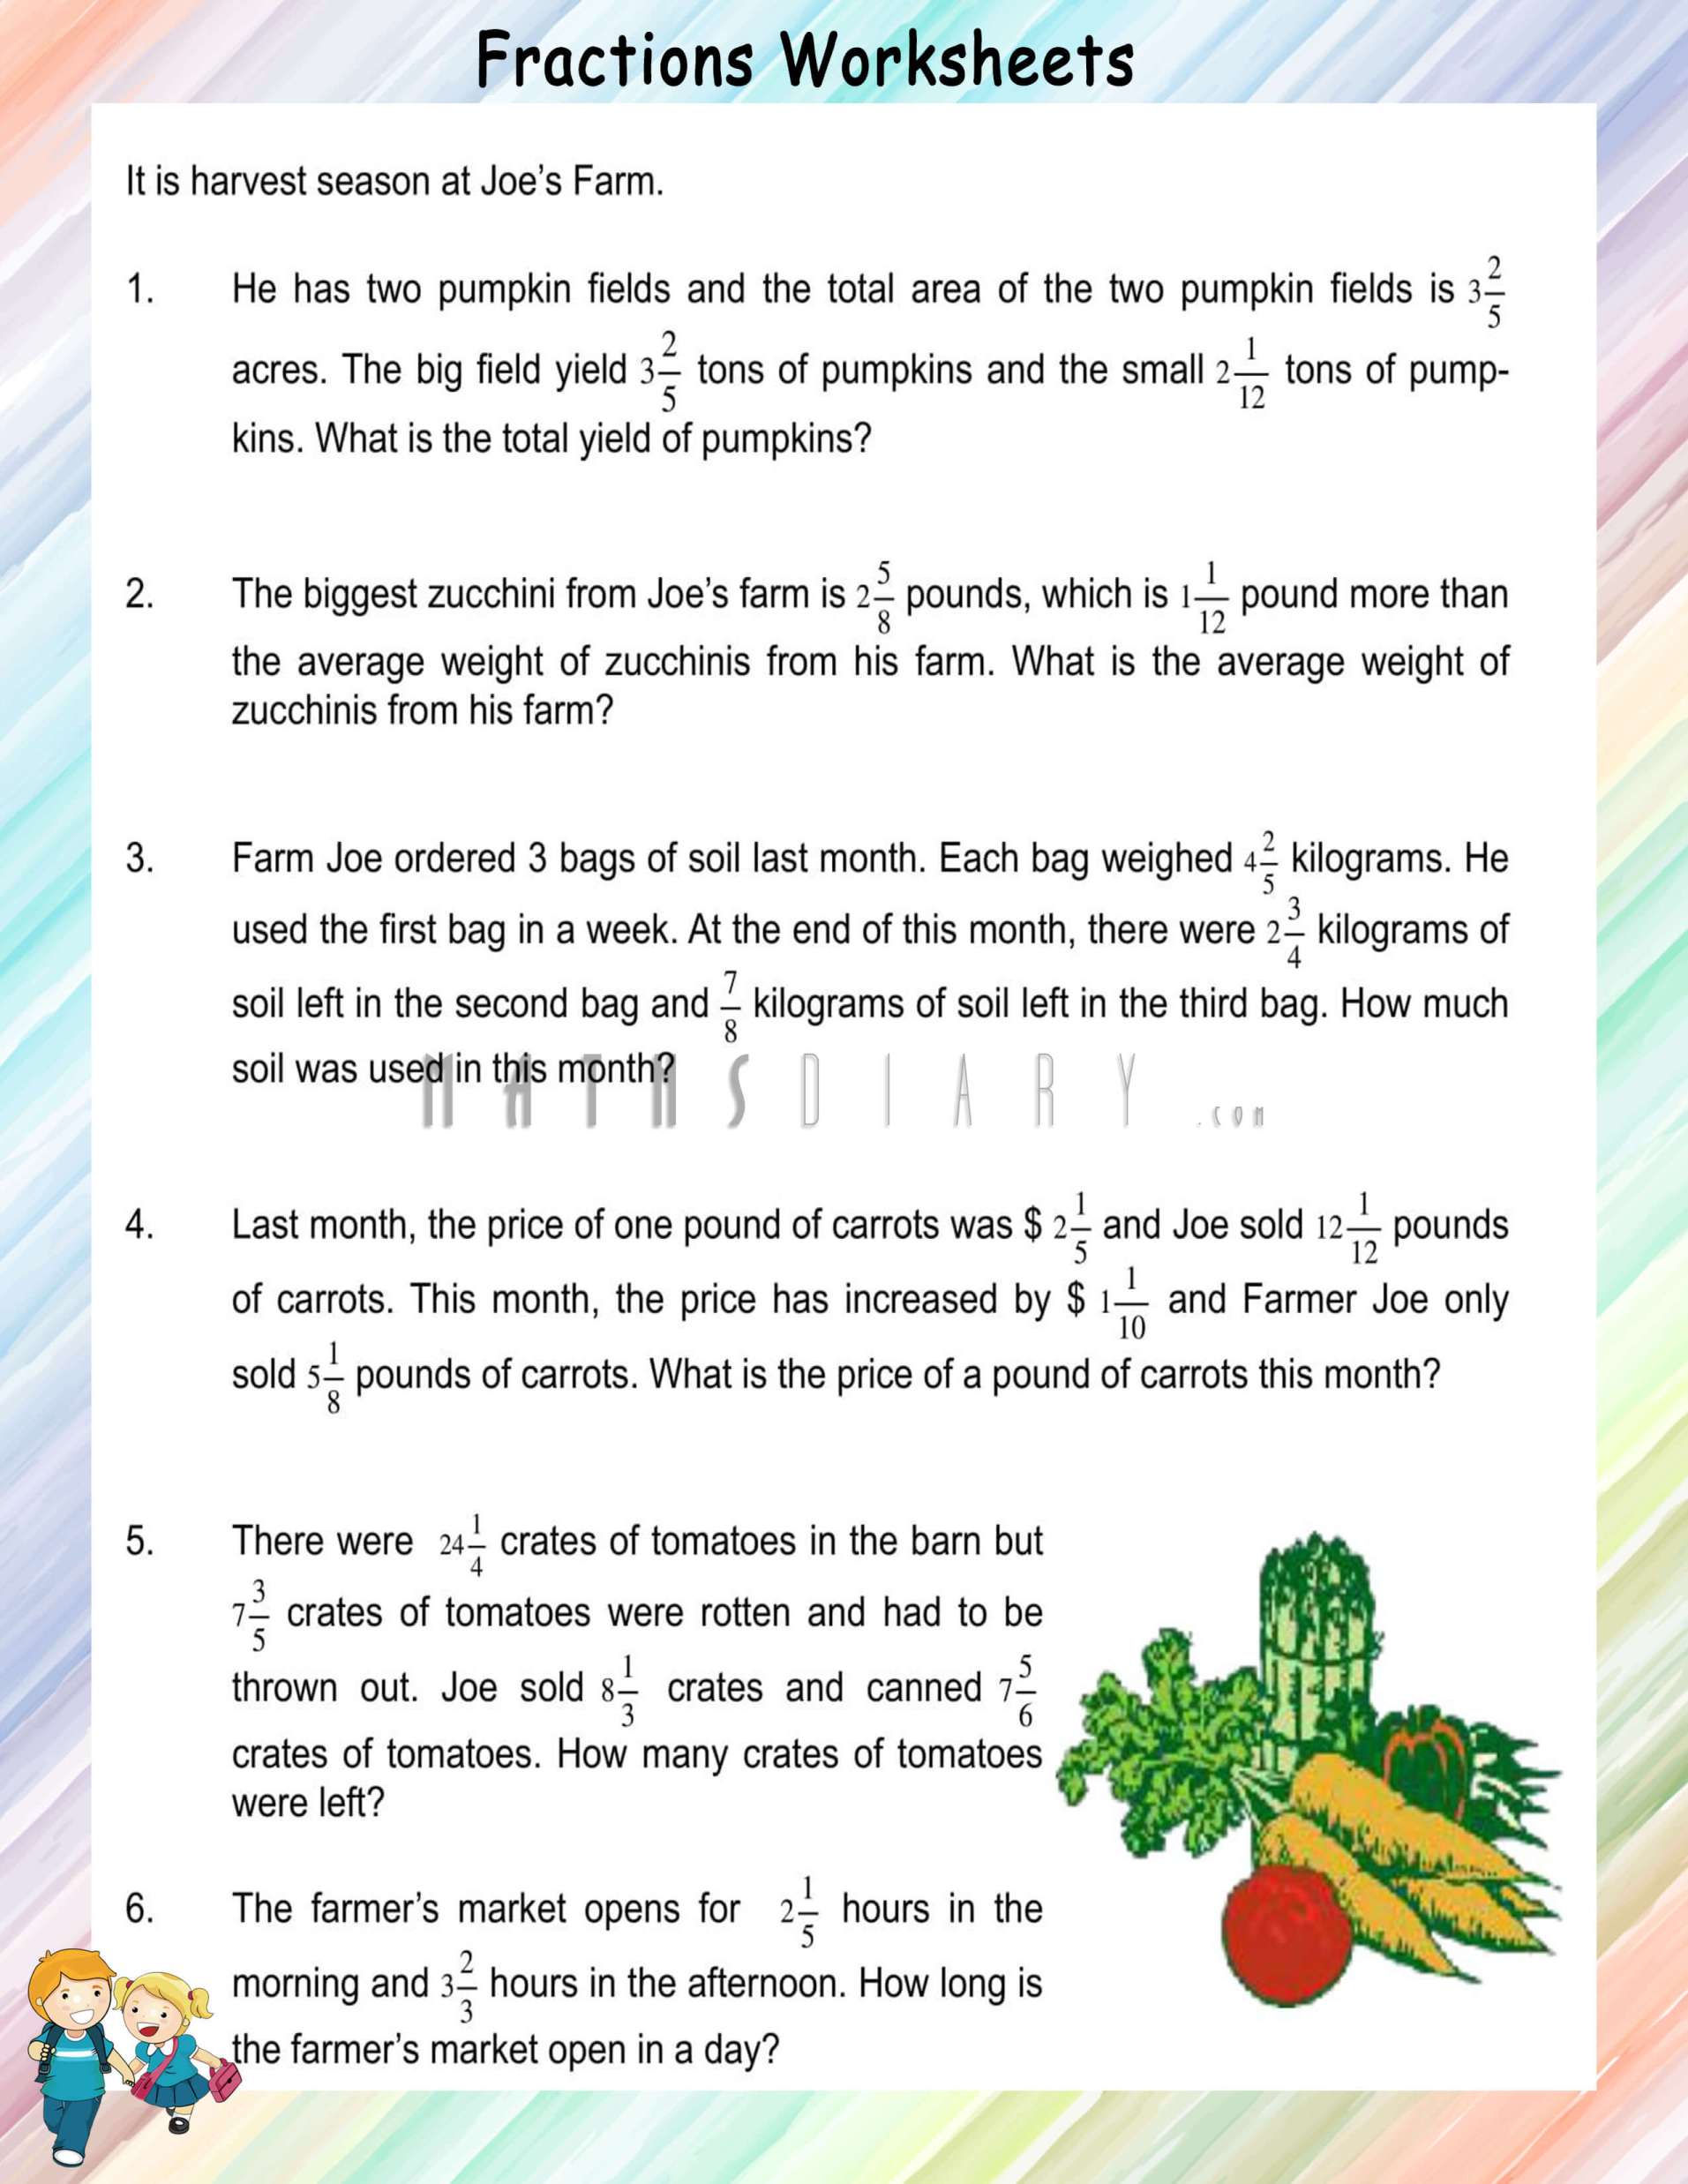 word-problems-of-fractions-worksheets-math-worksheets-mathsdiary